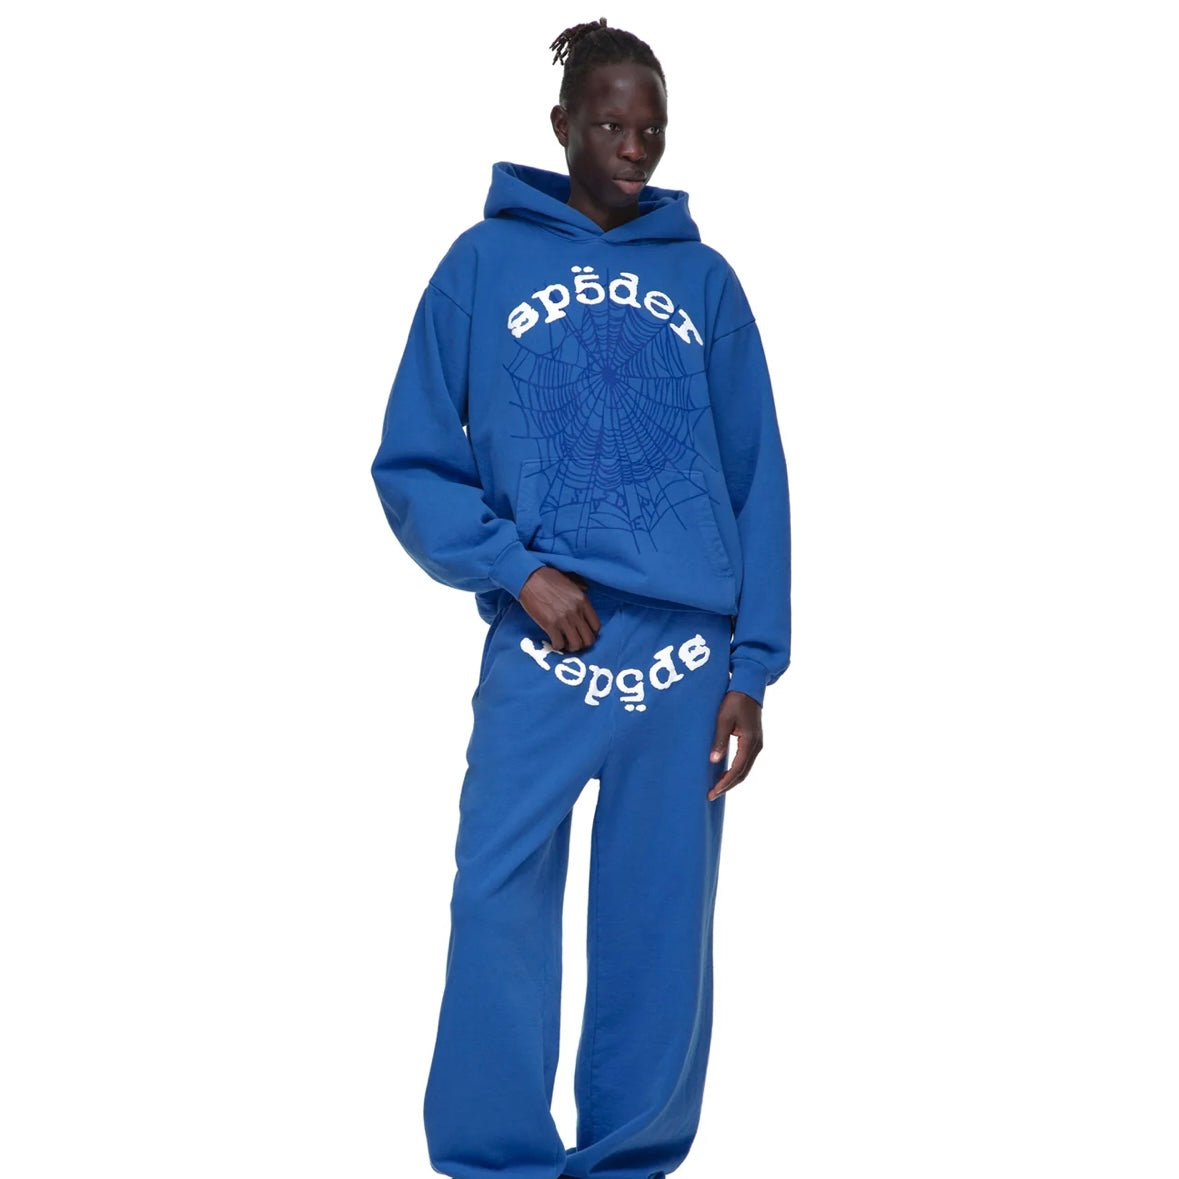 Sp5der Blue White Legacy Hoodie On Body Full Outfit Male